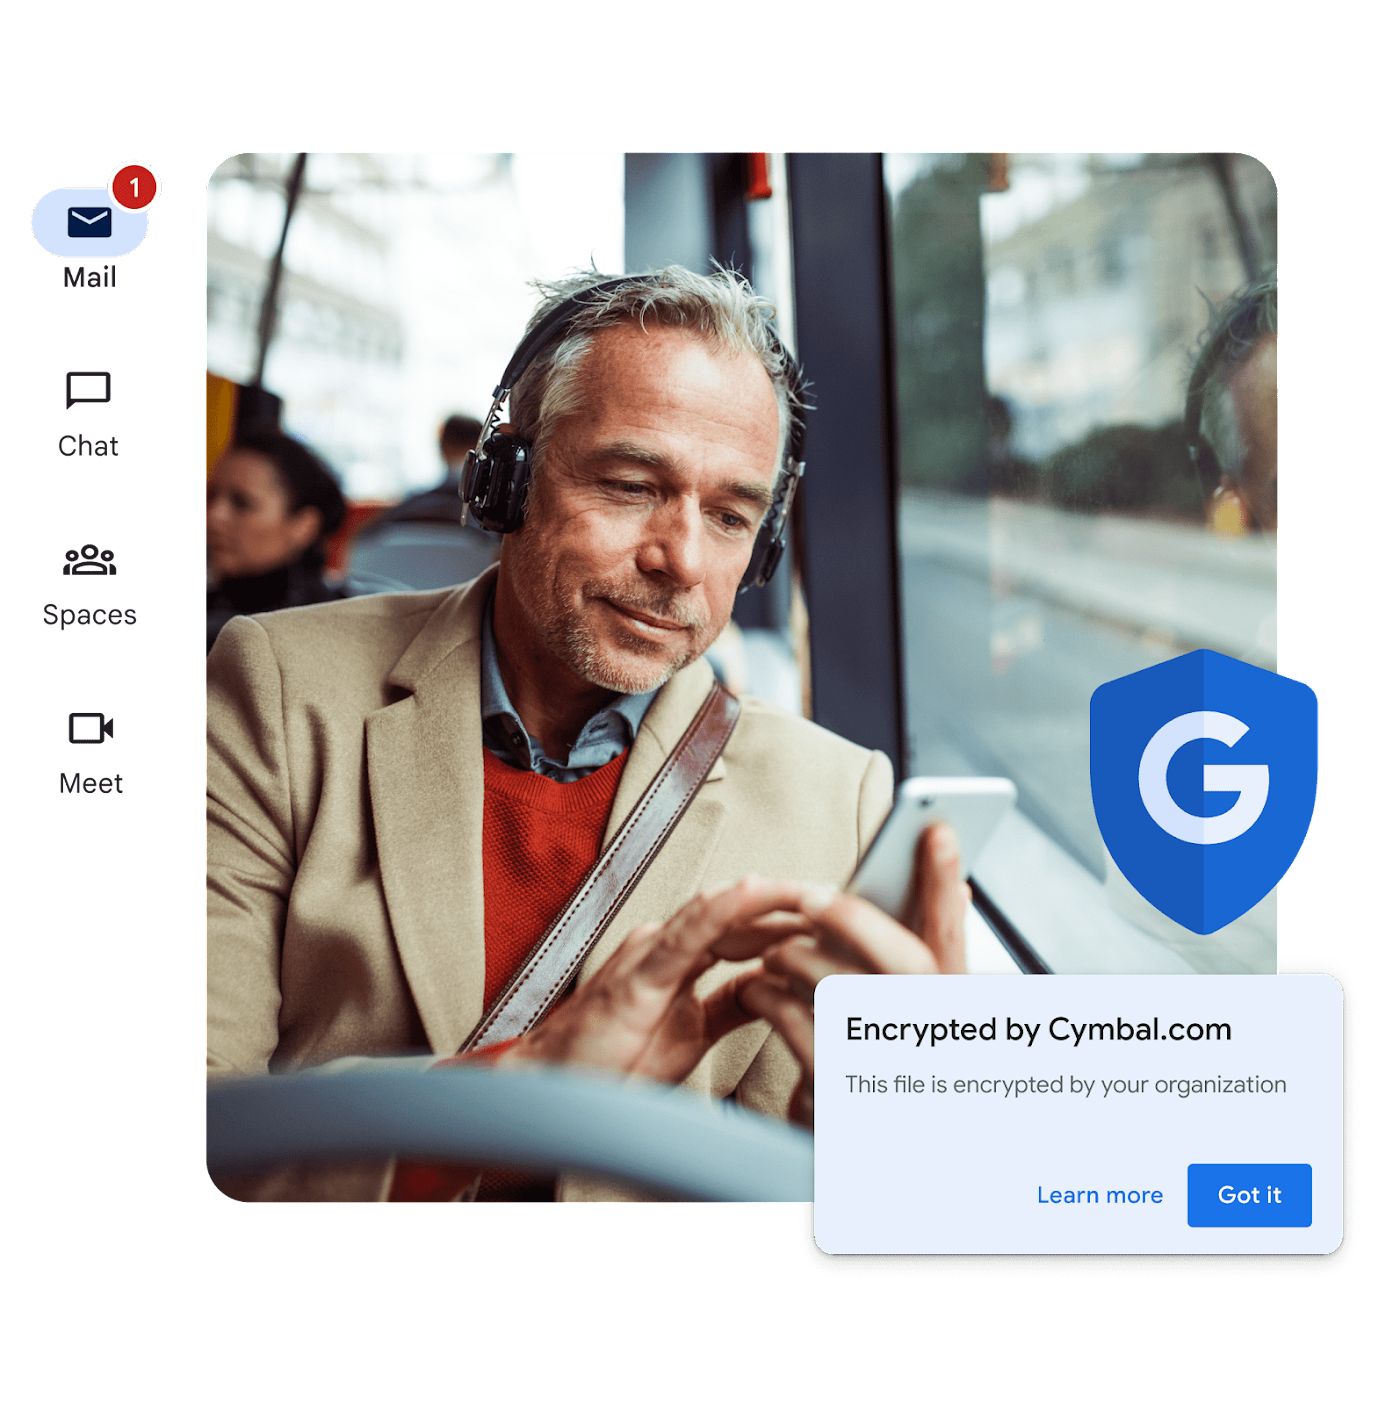 Commuter on a bus looking at the phone. Notification says his email is encrypted by his organization.